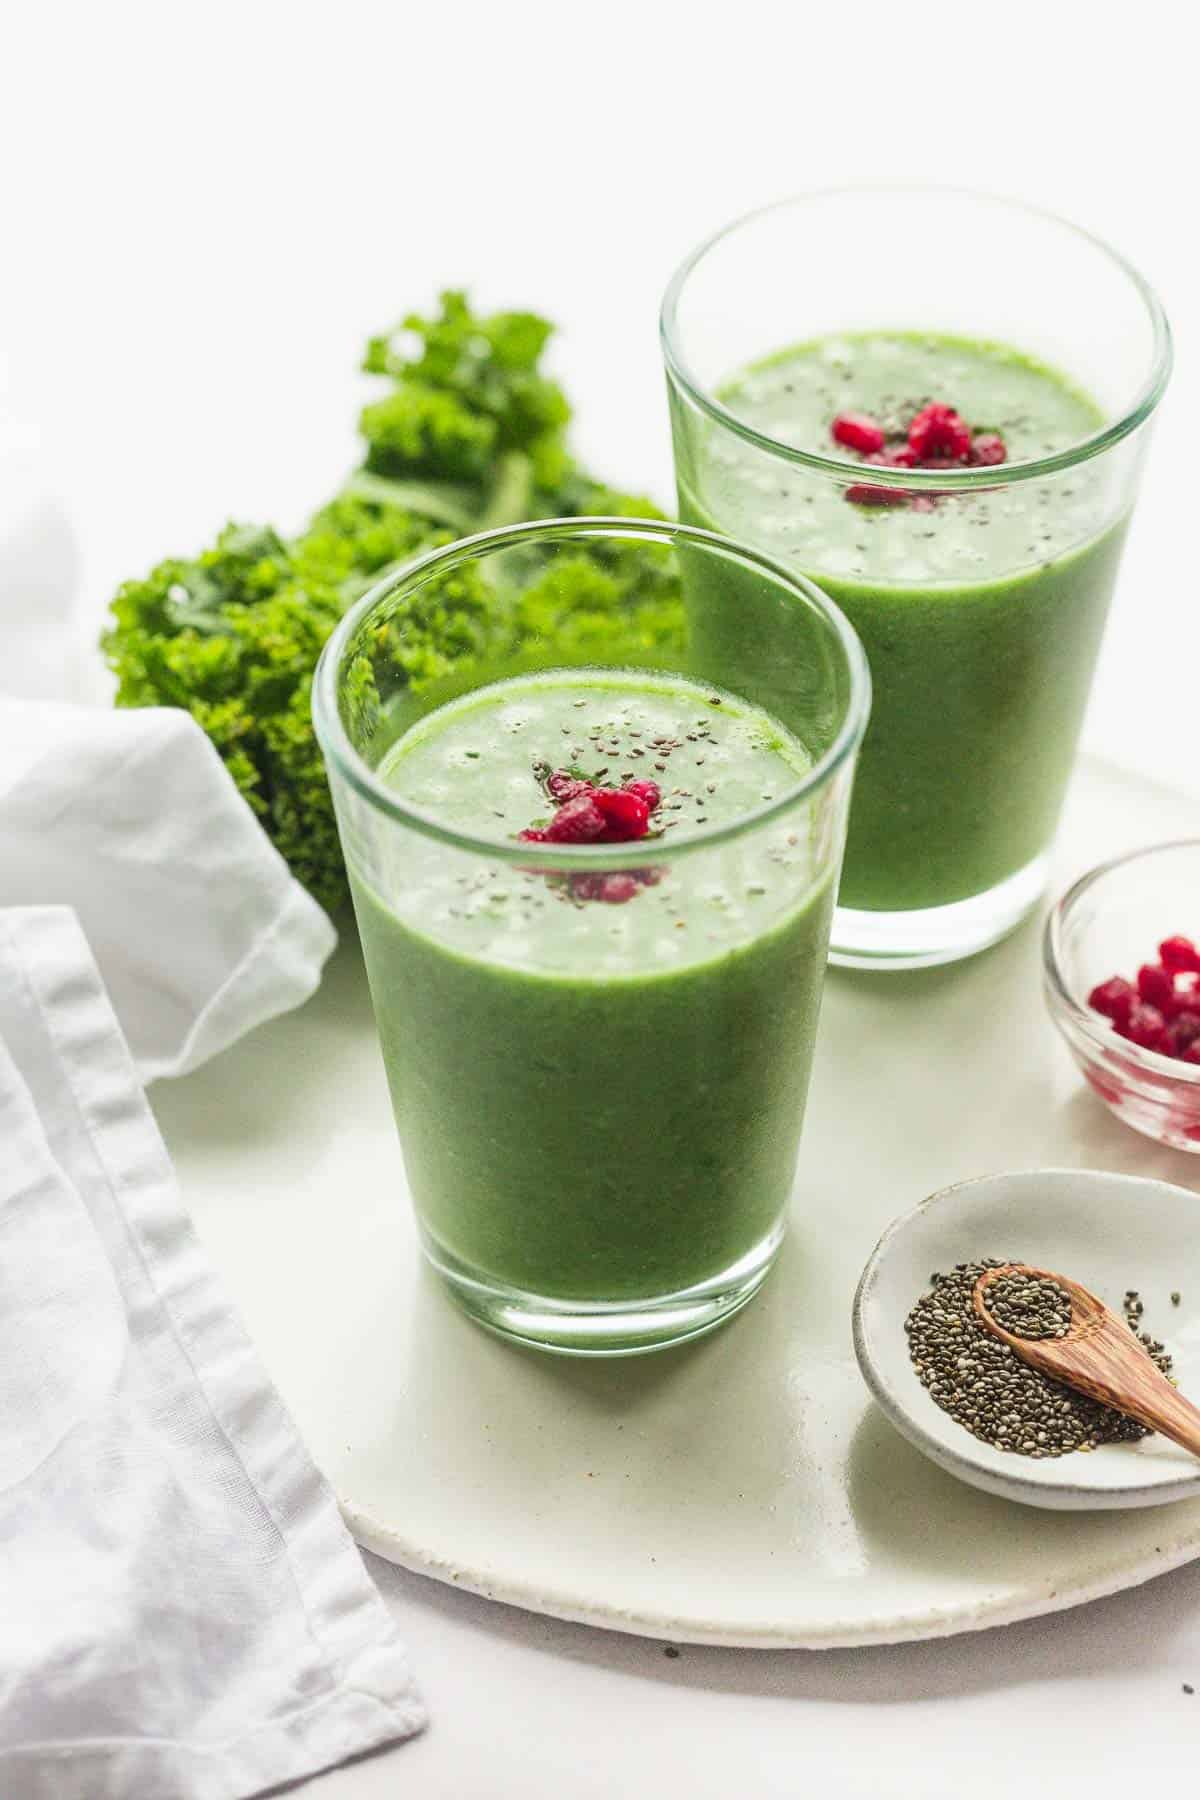 Kale Pineapple Smoothie in a glass